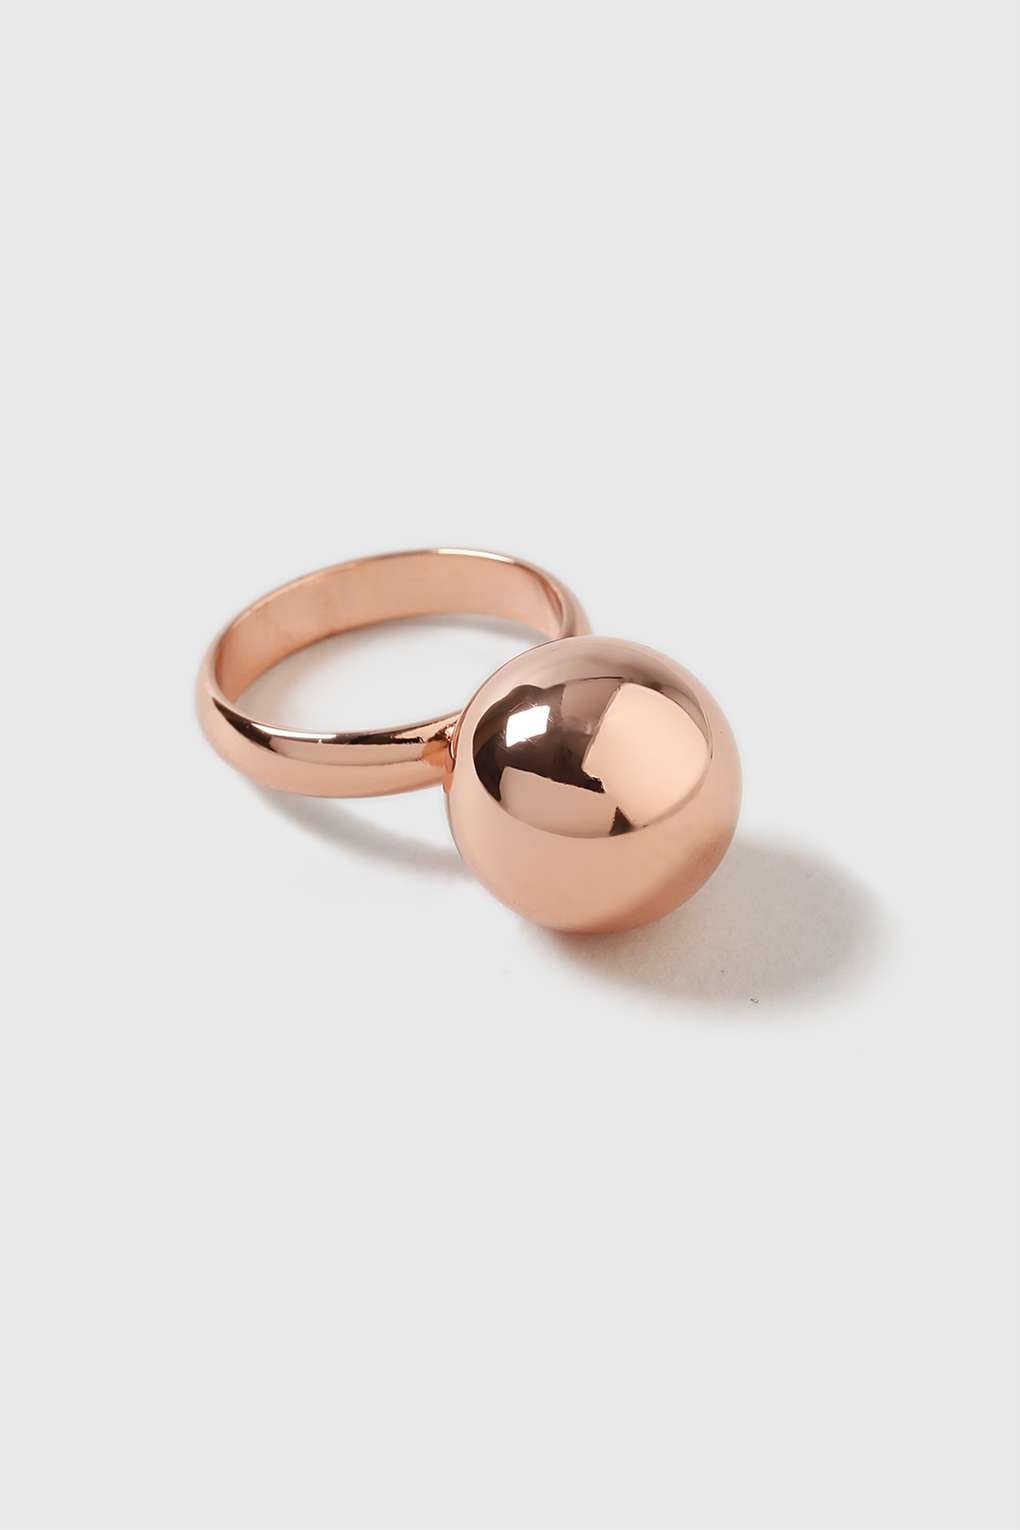 12 Michelle Obama Inspired Rose Gold Items You Need Now
